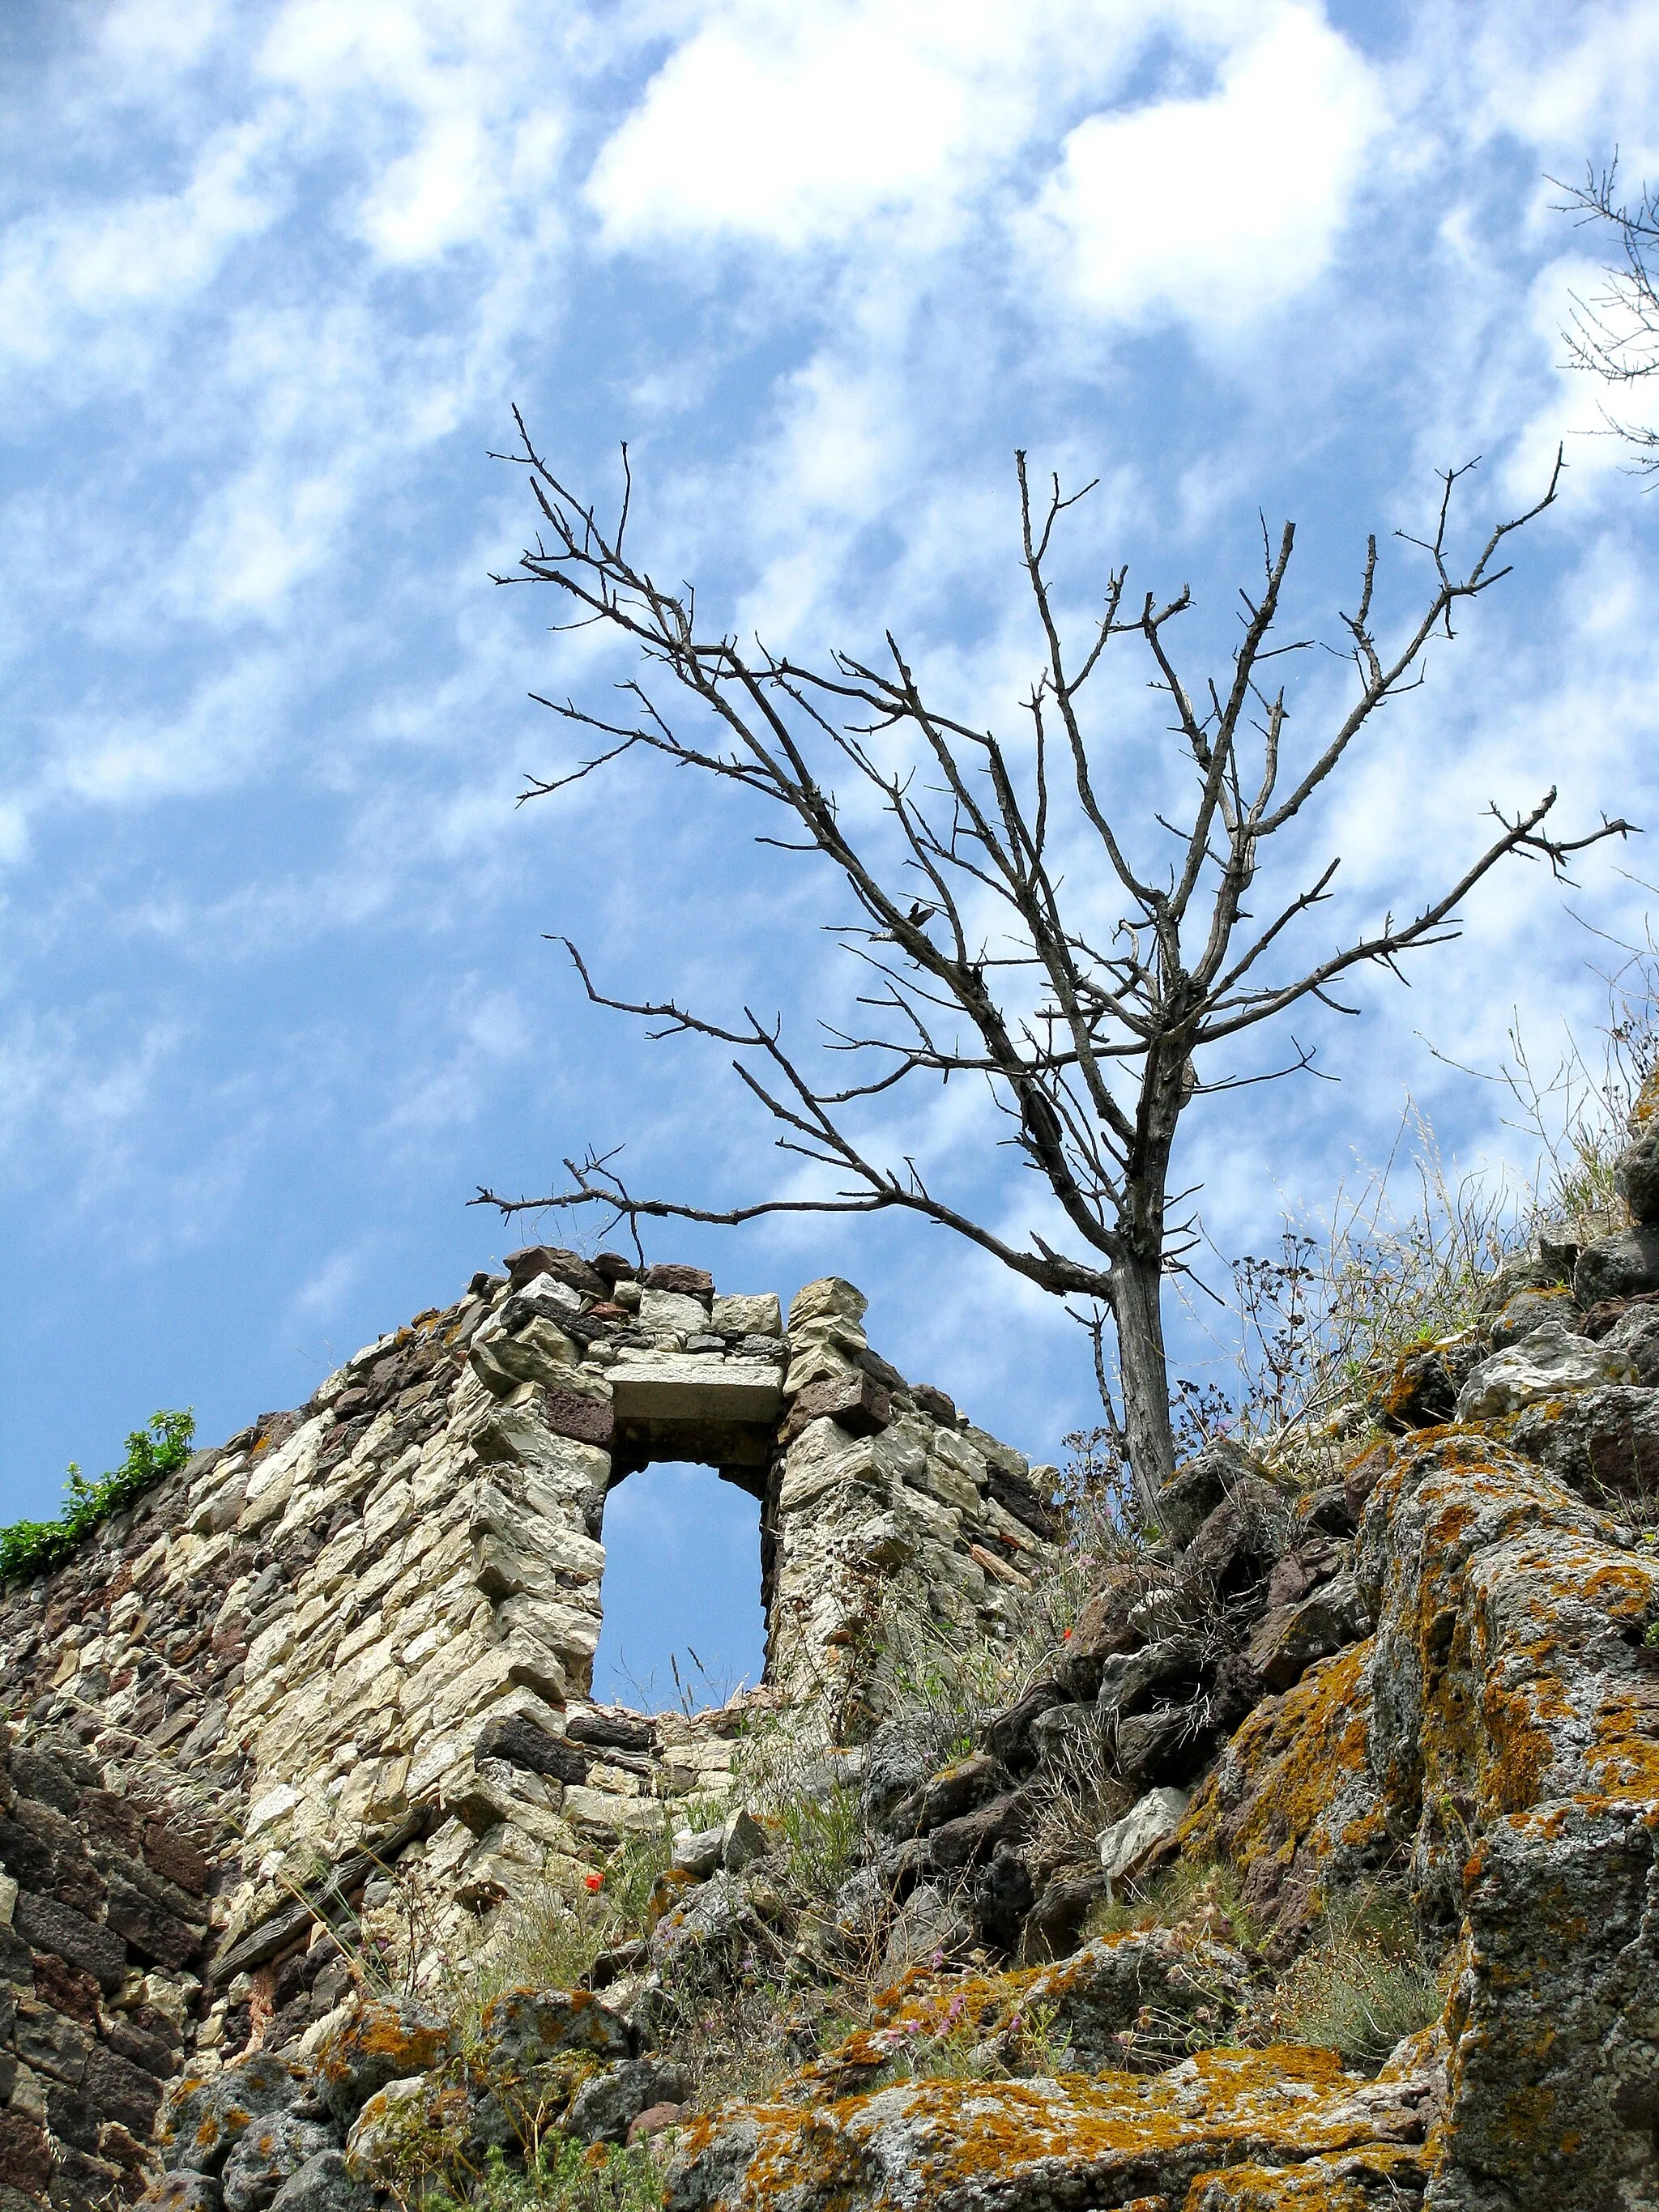 Photo showing: A picture of the castle ruins in Évenos in the Var department of the Provence-Alpes-Côte d'Azur region of France.